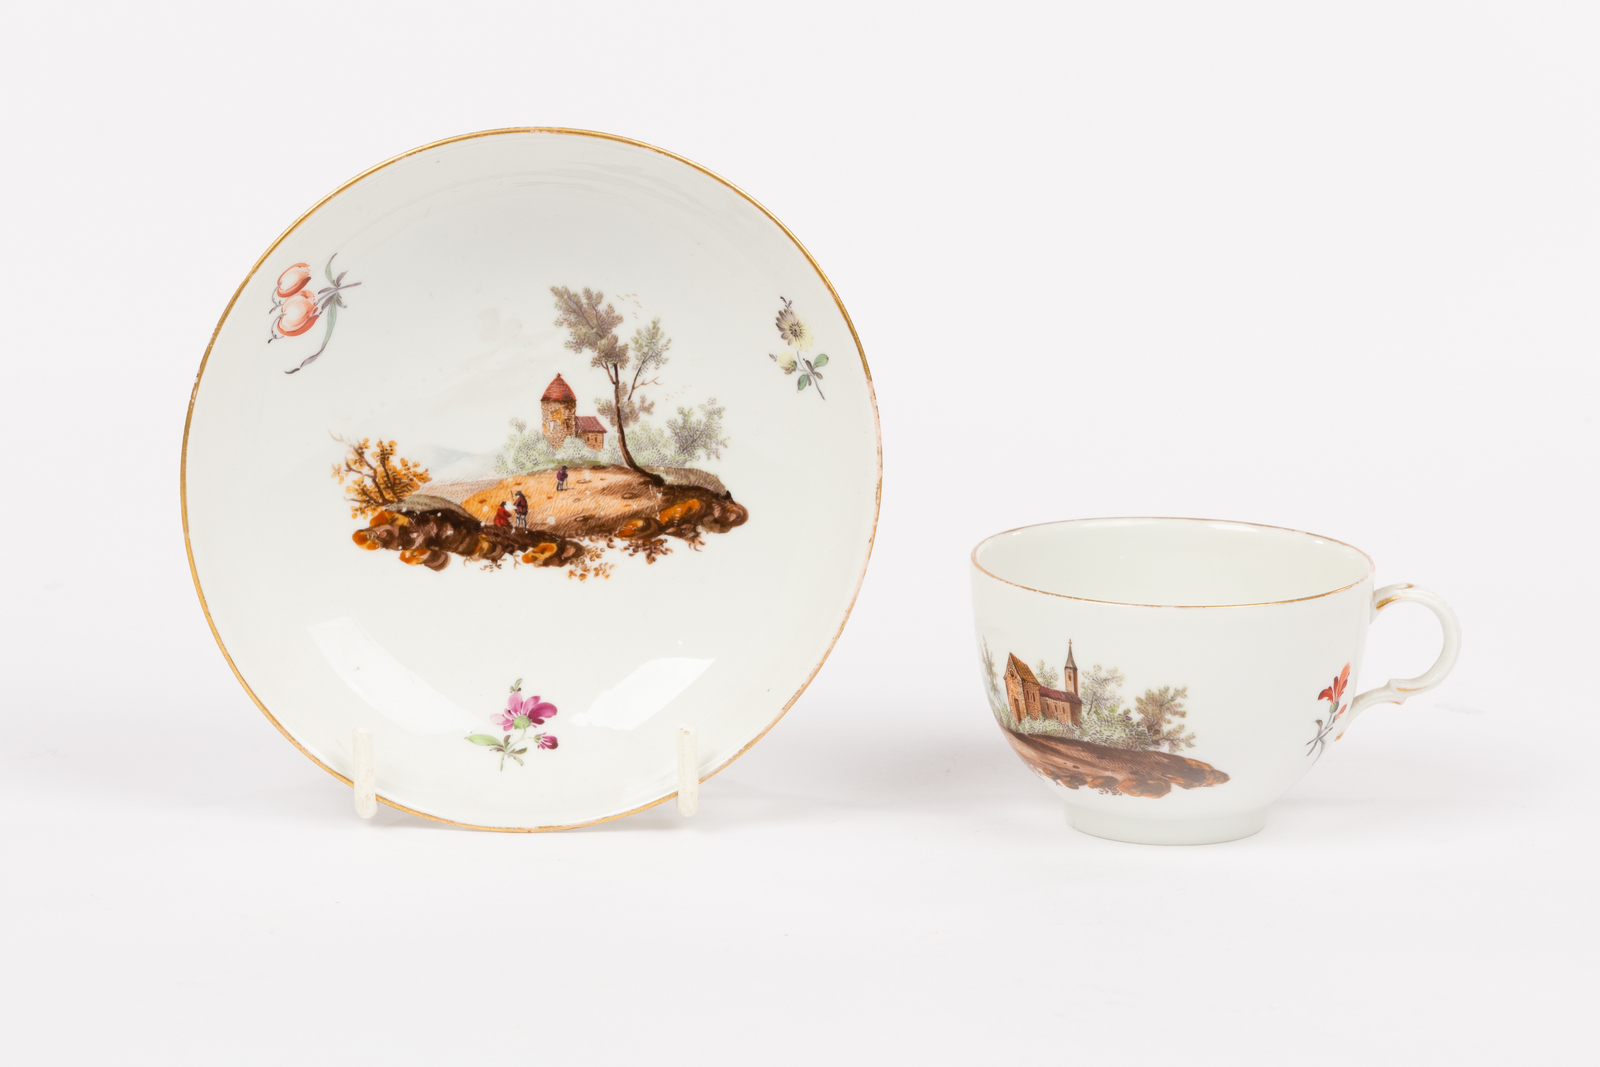 A Furstenberg teacup and saucer, late 18th Century, painted landscapes and scattered sprigs,